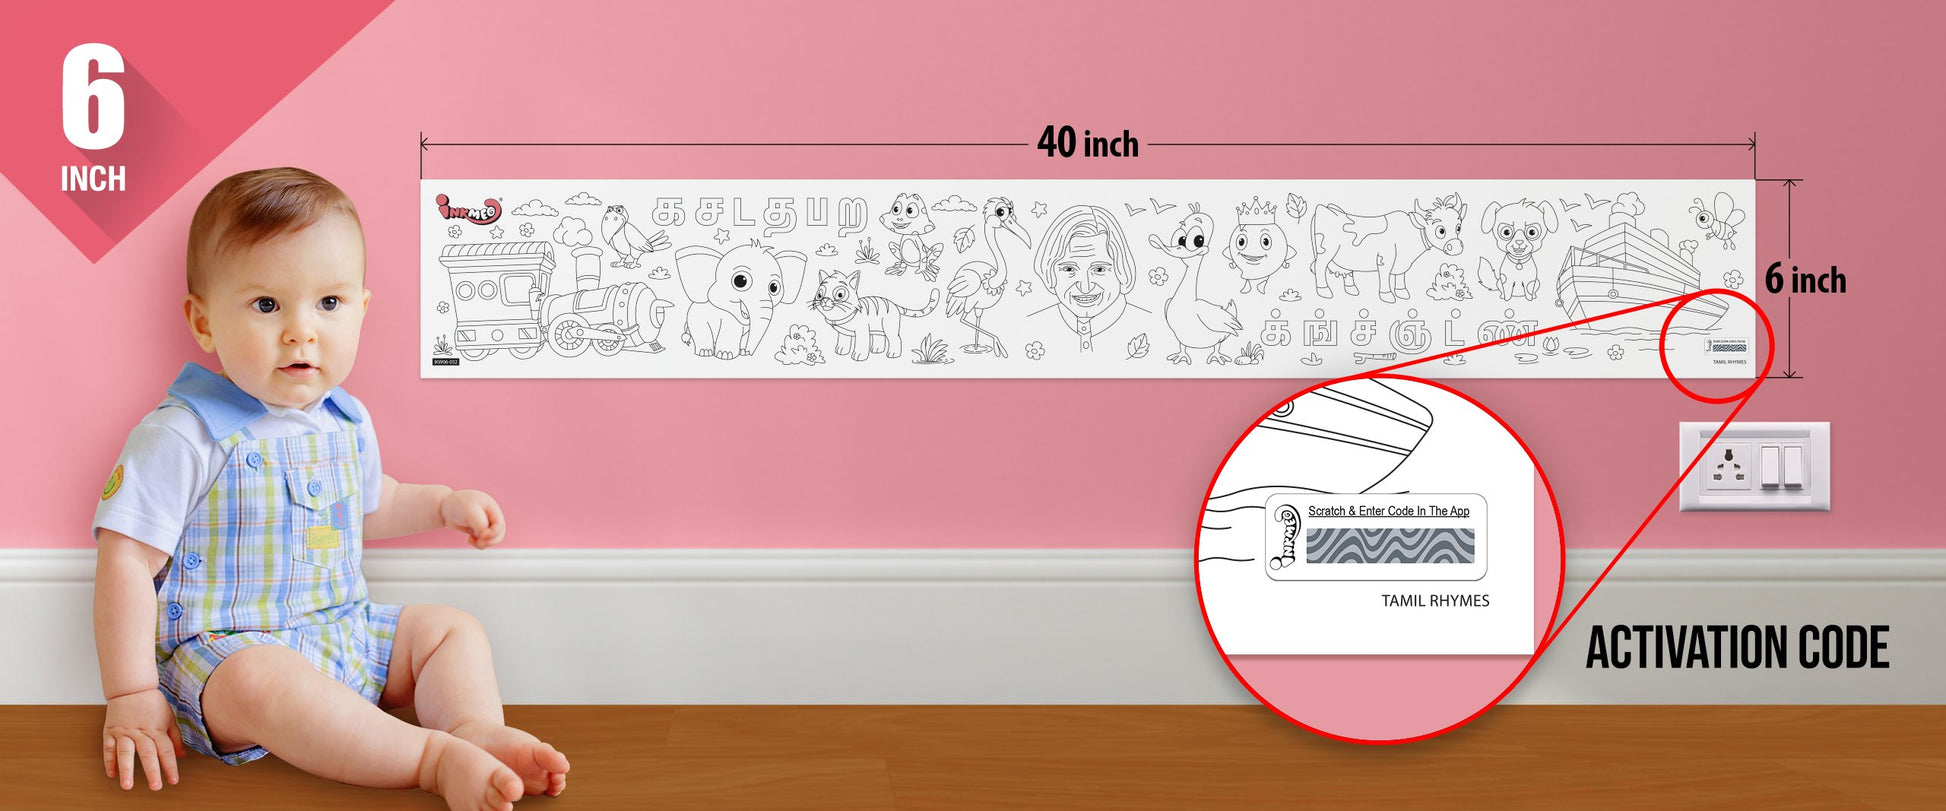 The image depicts a 6*40-inch roll adhered to the wall with a baby playing nearby, and the activation code is zoomed in separately.